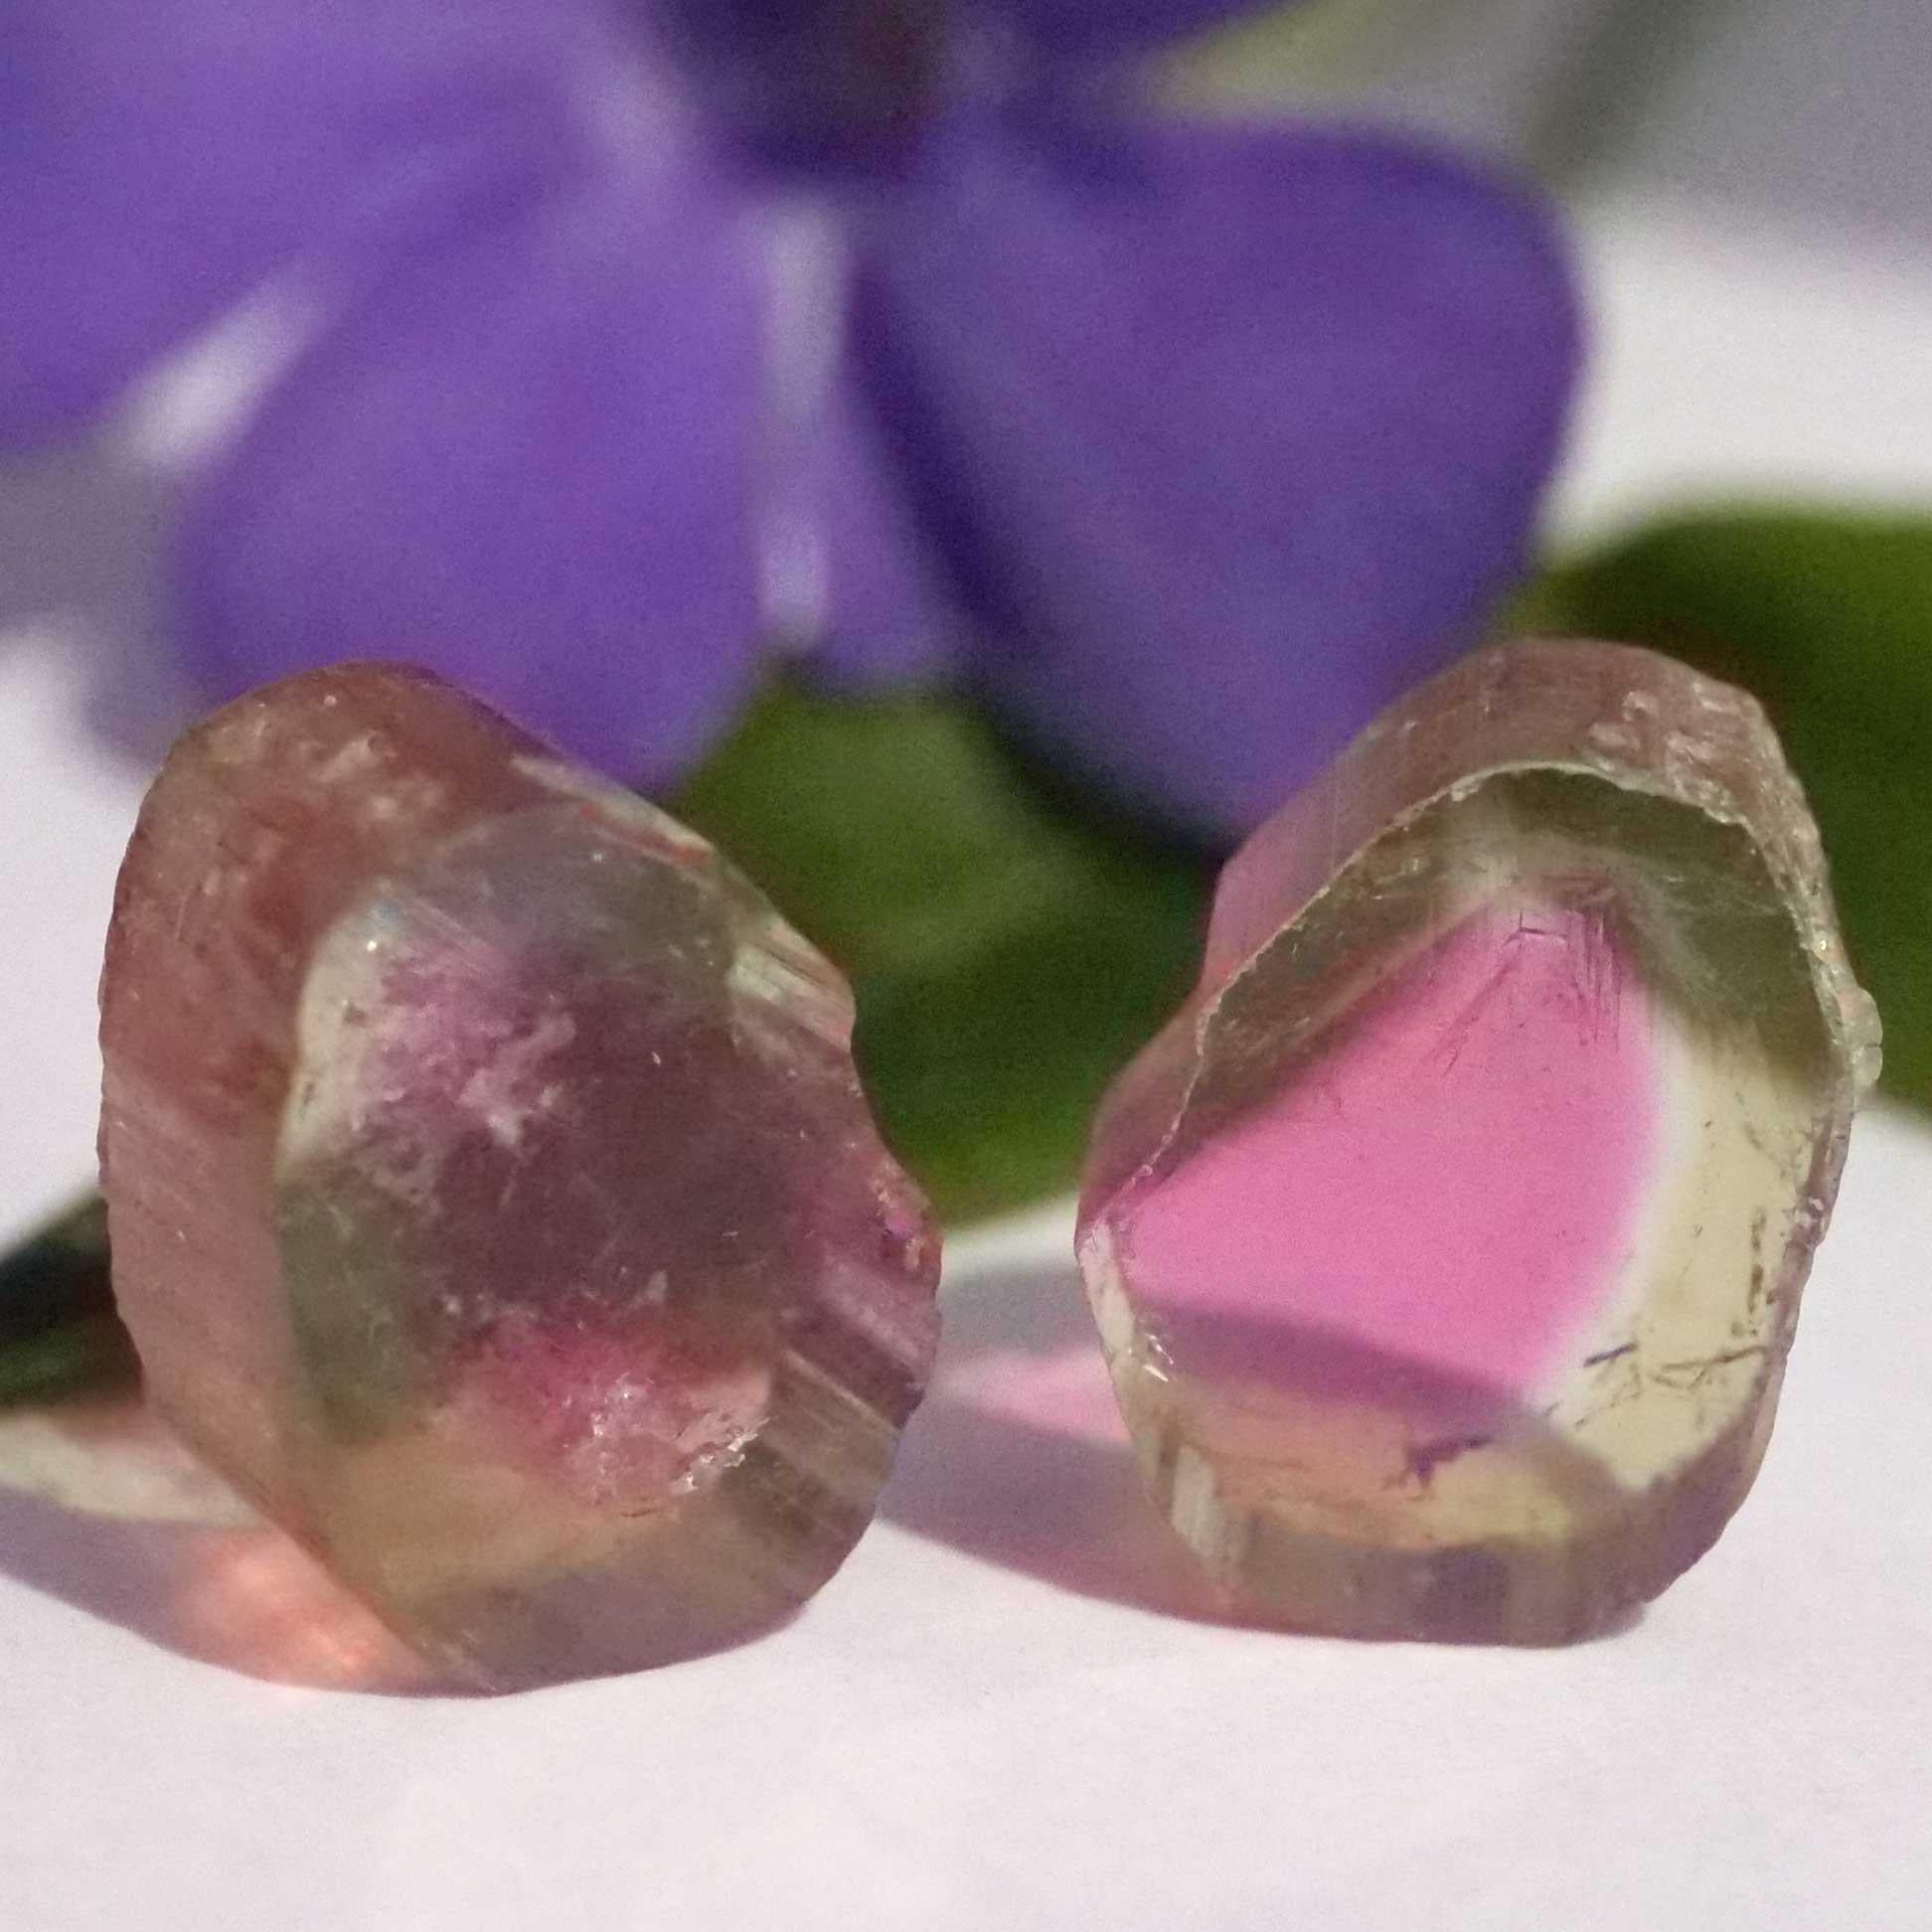 bright pink green untreated watermelon tourmaline slices from Afghanistan as a pair totaling approx. 6.50 ct, 9 x 7 x 4 mm and 9 x 7 x 4.4 mm, untreated, AAA+, cut smoothly with clear edges (not cracked), transparent with natural . Growth